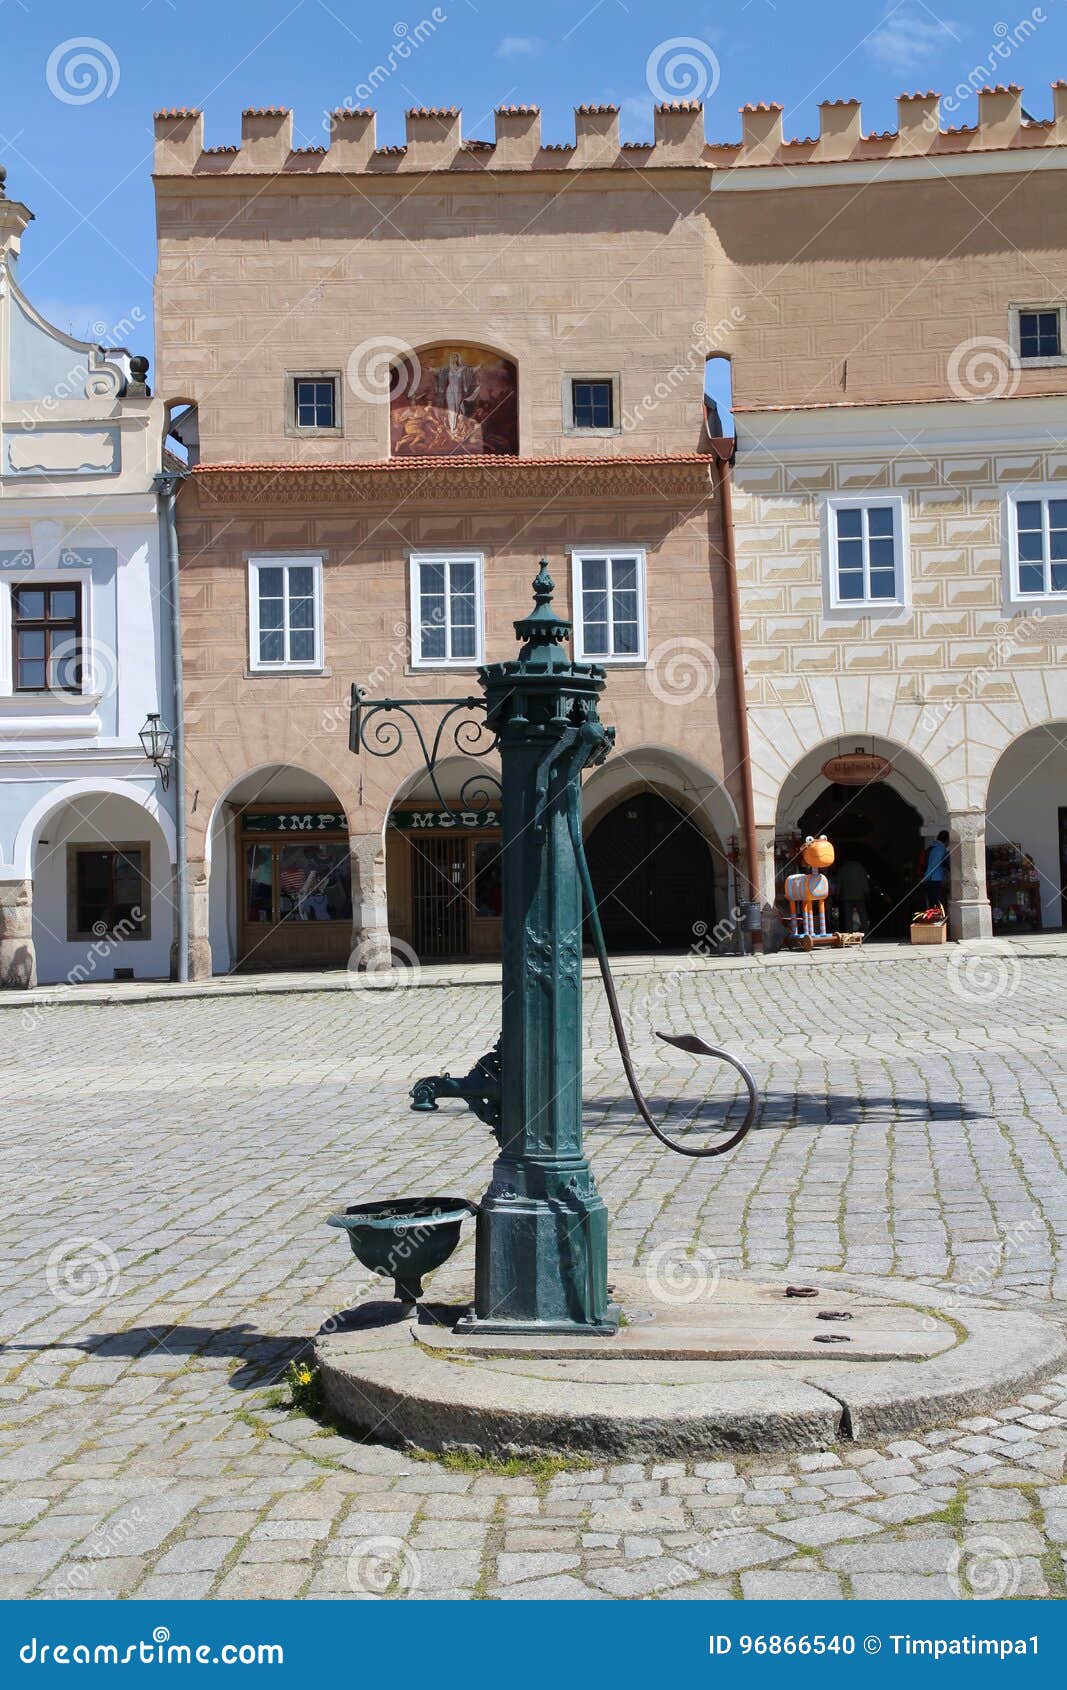 water pump on the main square in telÃÂ